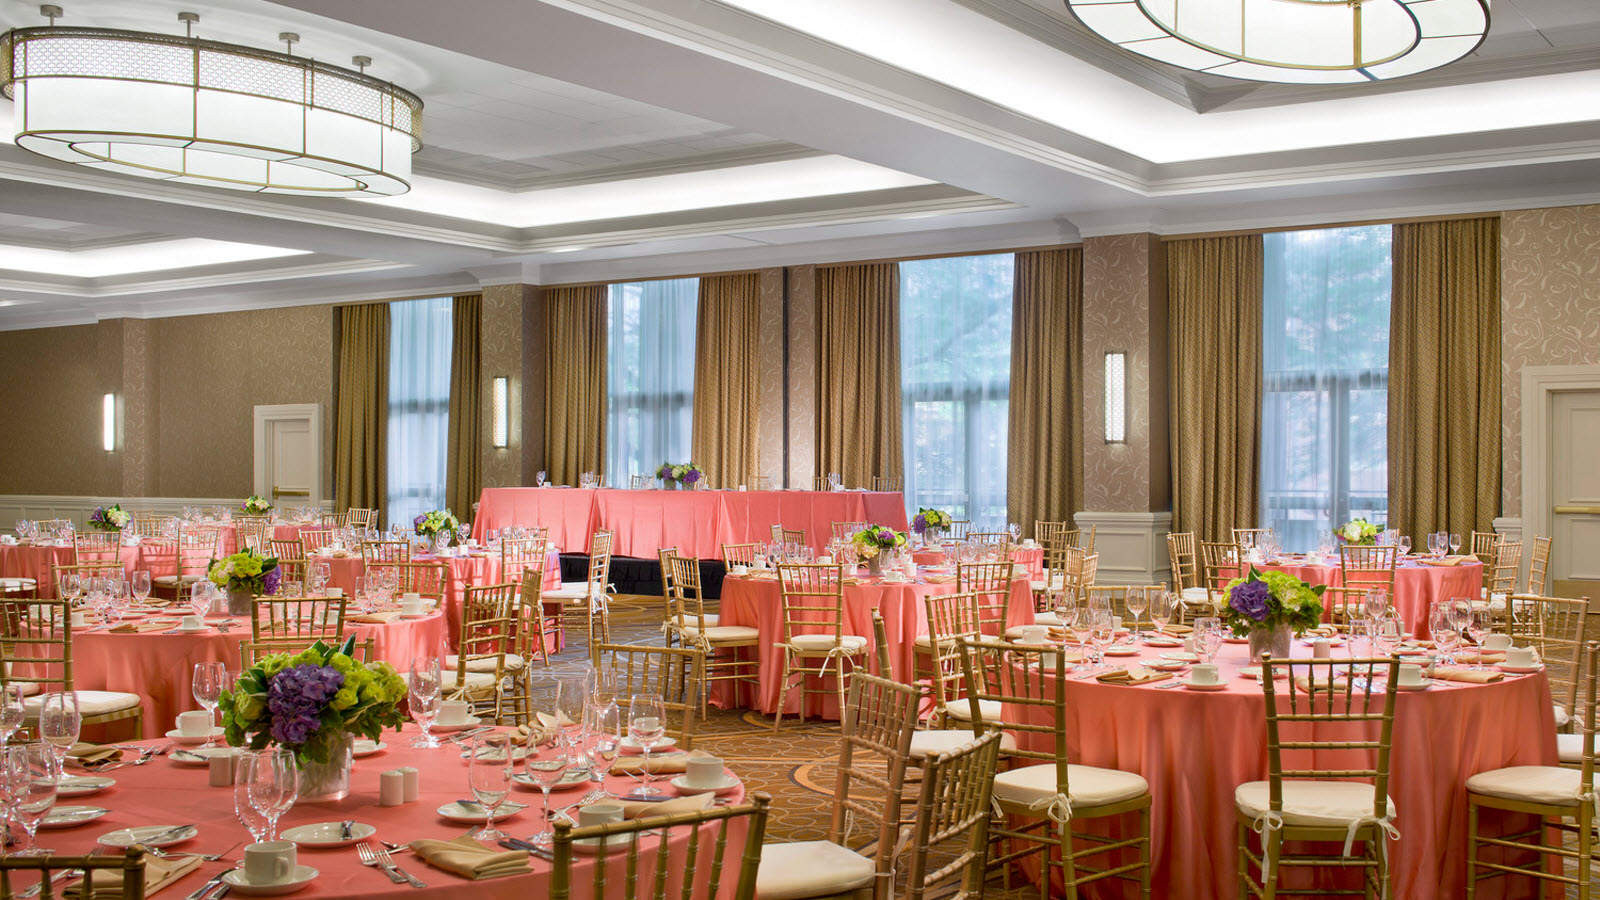 The Best Ideas for Wedding Venues In Boston – Home, Family, Style and